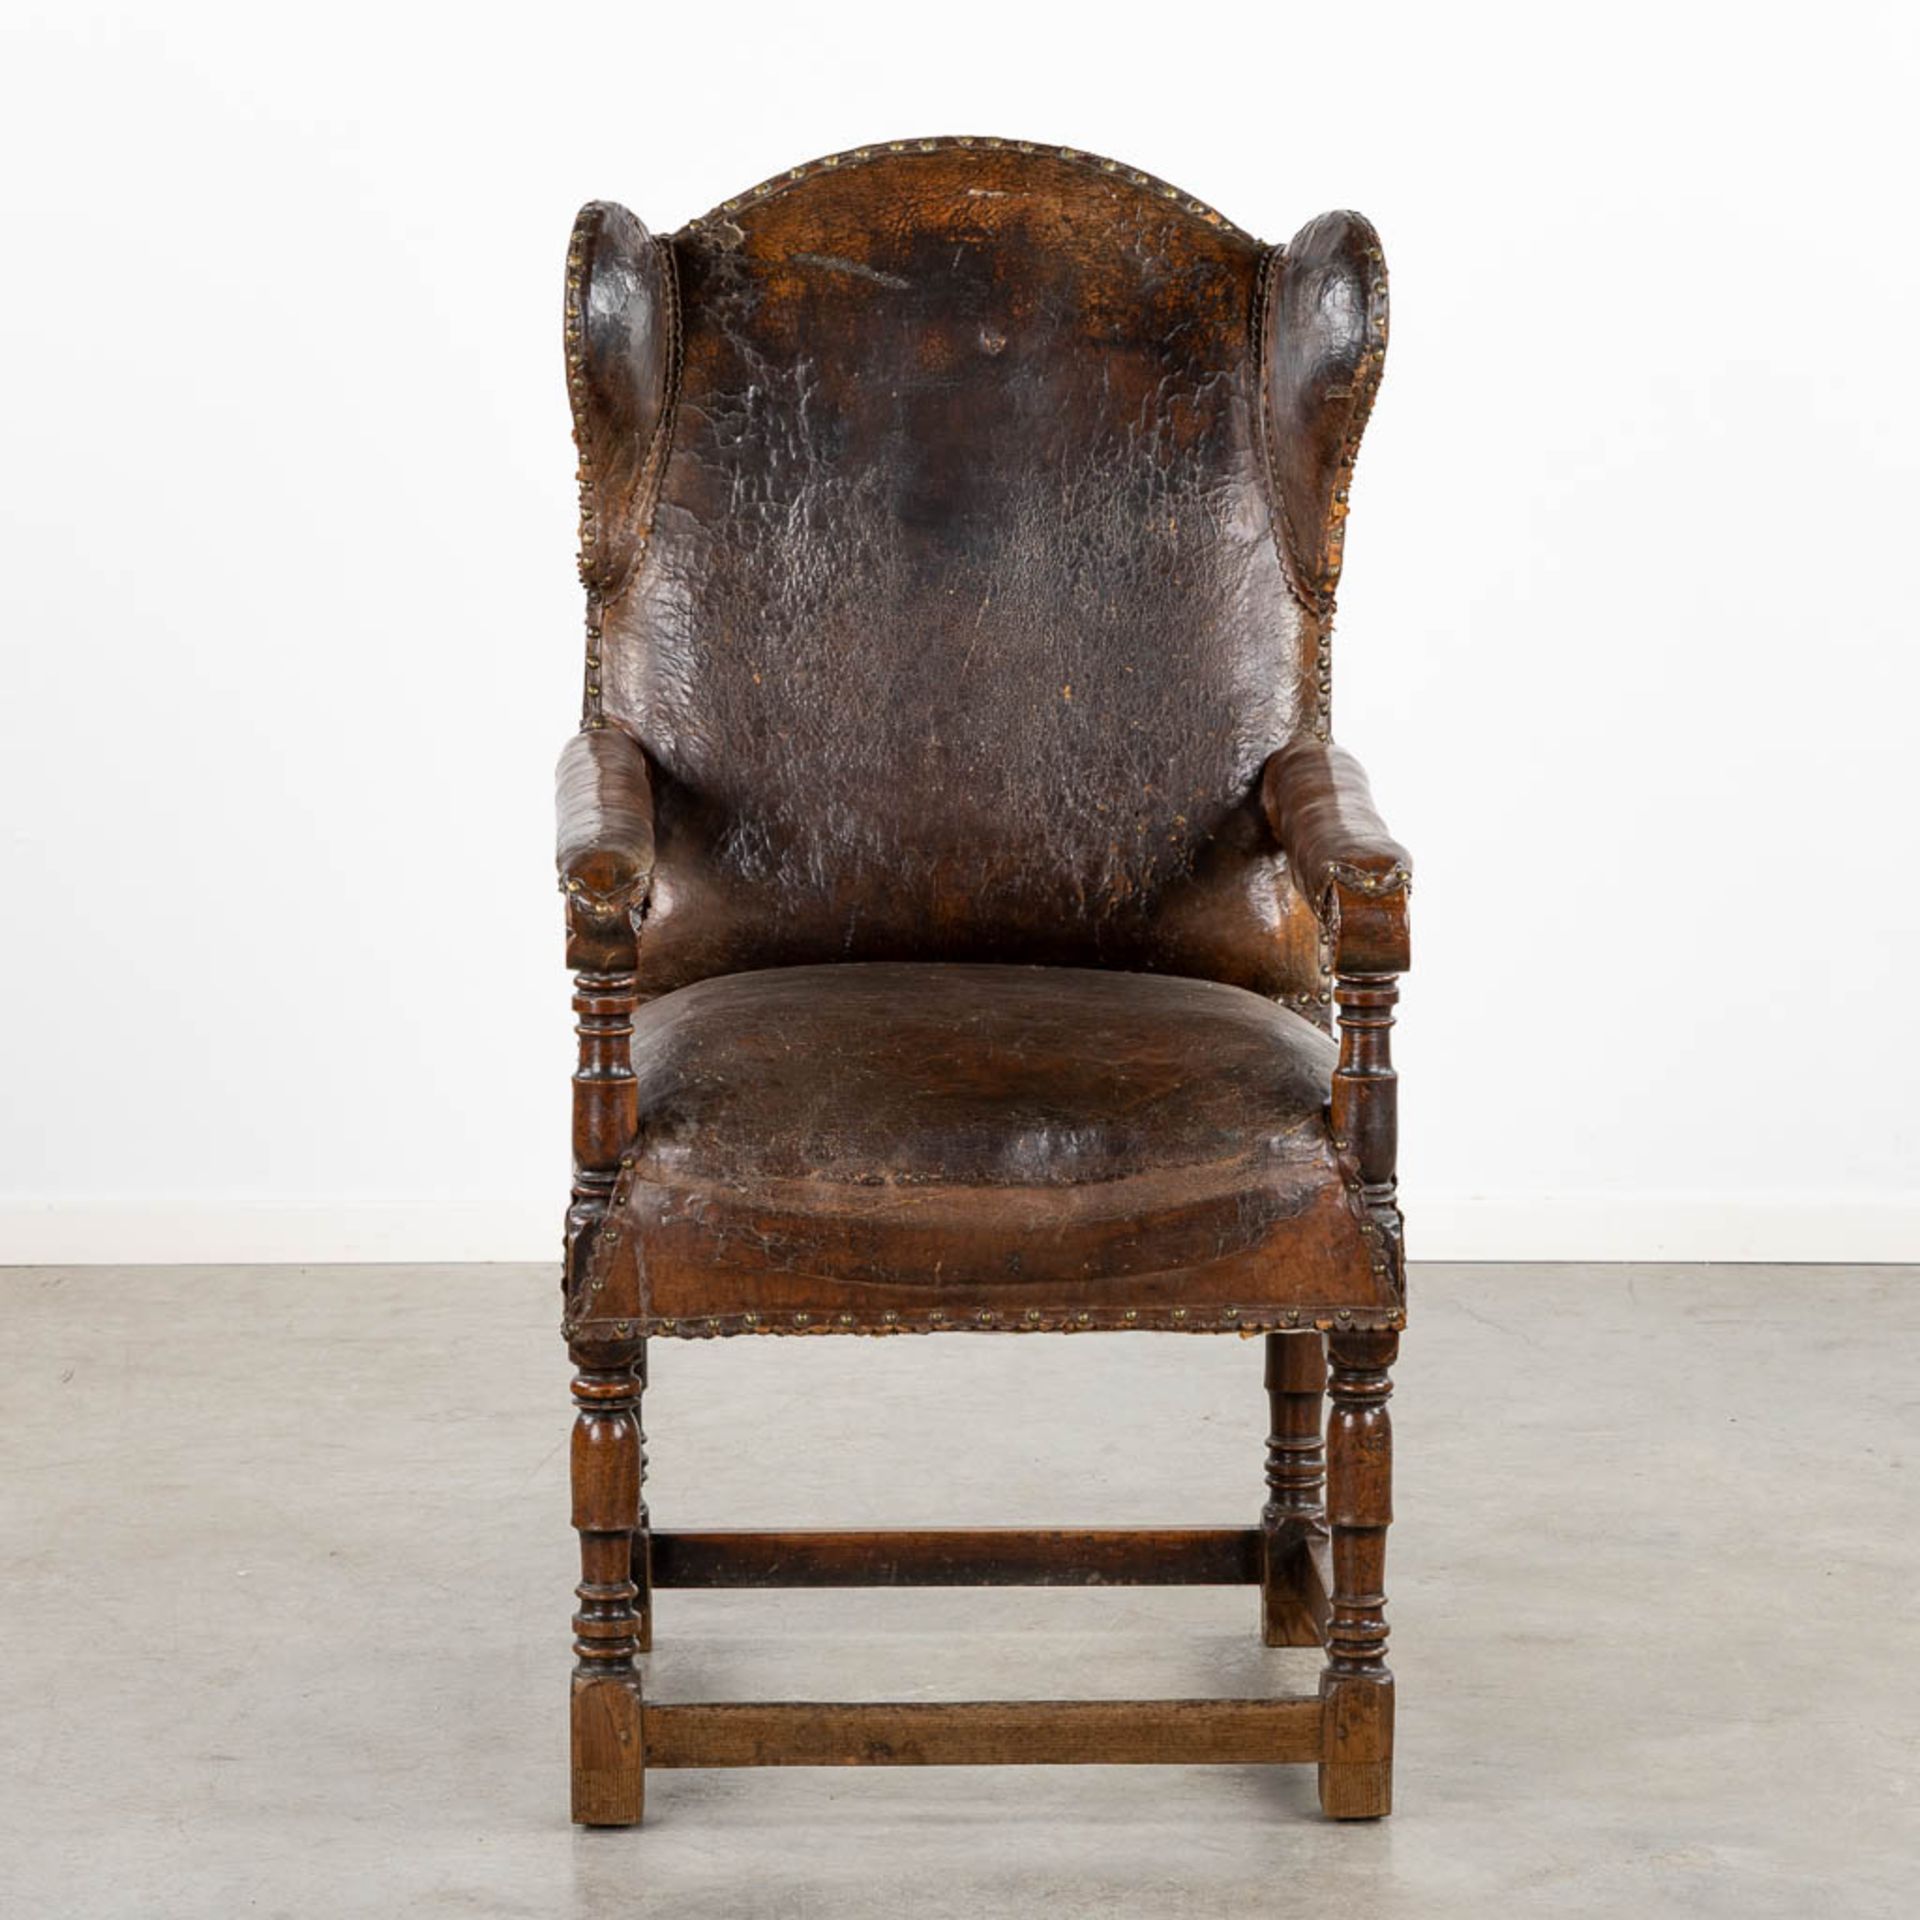 An antique Throne chair, leather on wood, great patina. 18th C. (L:76 x W:67 x H:125 cm) - Bild 3 aus 13